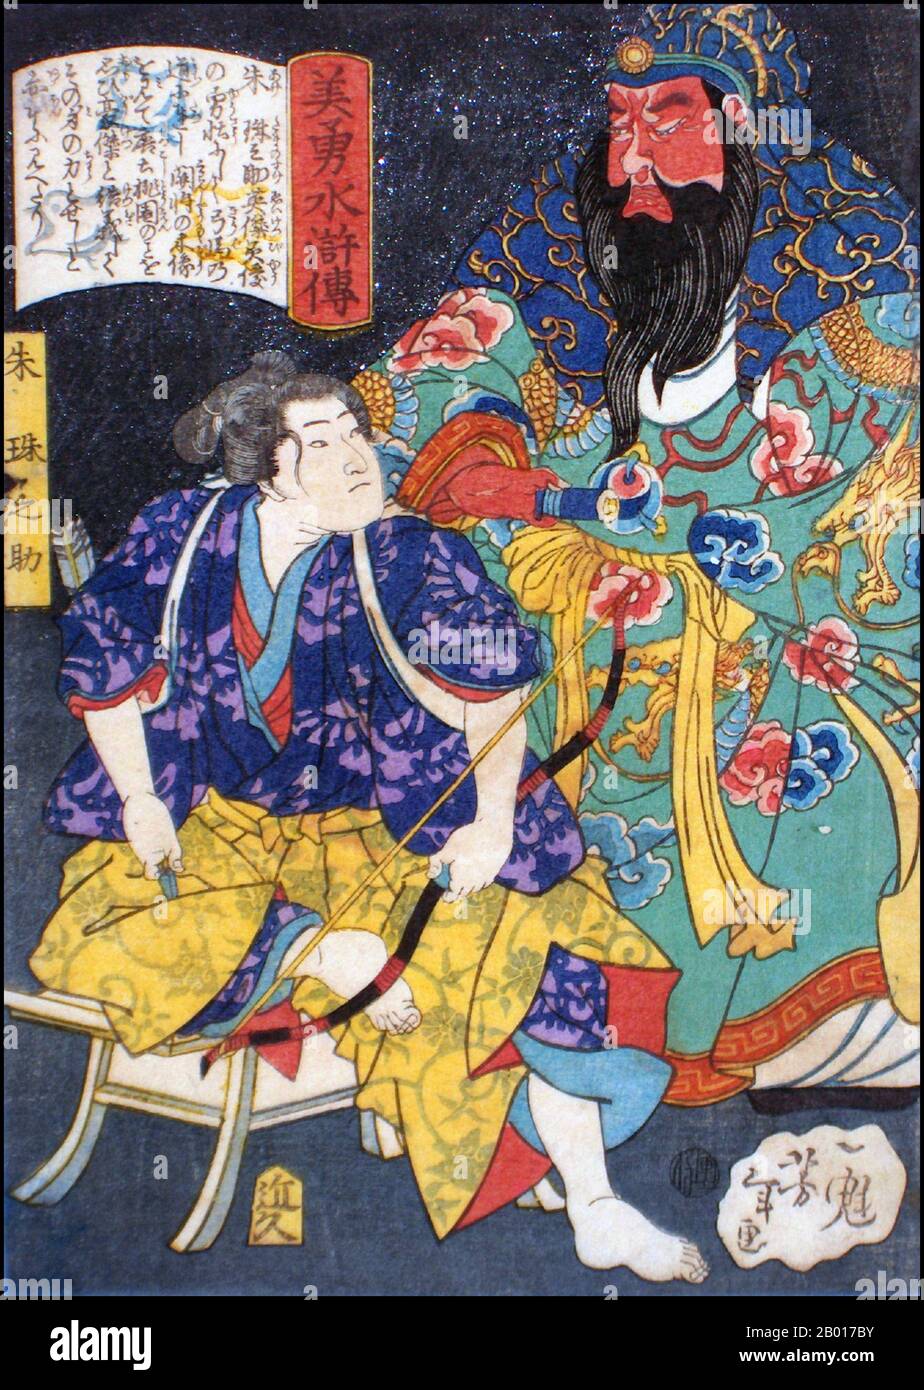 Japan: 'Aka Tamanosuke Seated by the Statue of a Chinese General'. Ukiyo-e woodblock print from the series 'Heroes of the Water Margin' by Tsukioka Yoshitoshi (1839 - 9 June 1892), 1866.  Tsukioka Yoshitoshi, also named Taiso Yoshitoshi, was a Japanese artist. He is widely recognized as the last great master of Ukiyo-e, a type of Japanese woodblock printing. He is additionally regarded as one of the form's greatest innovators. His career spanned two eras – the last years of feudal Japan, and the first years of modern Japan following the Meiji Restoration. Stock Photo